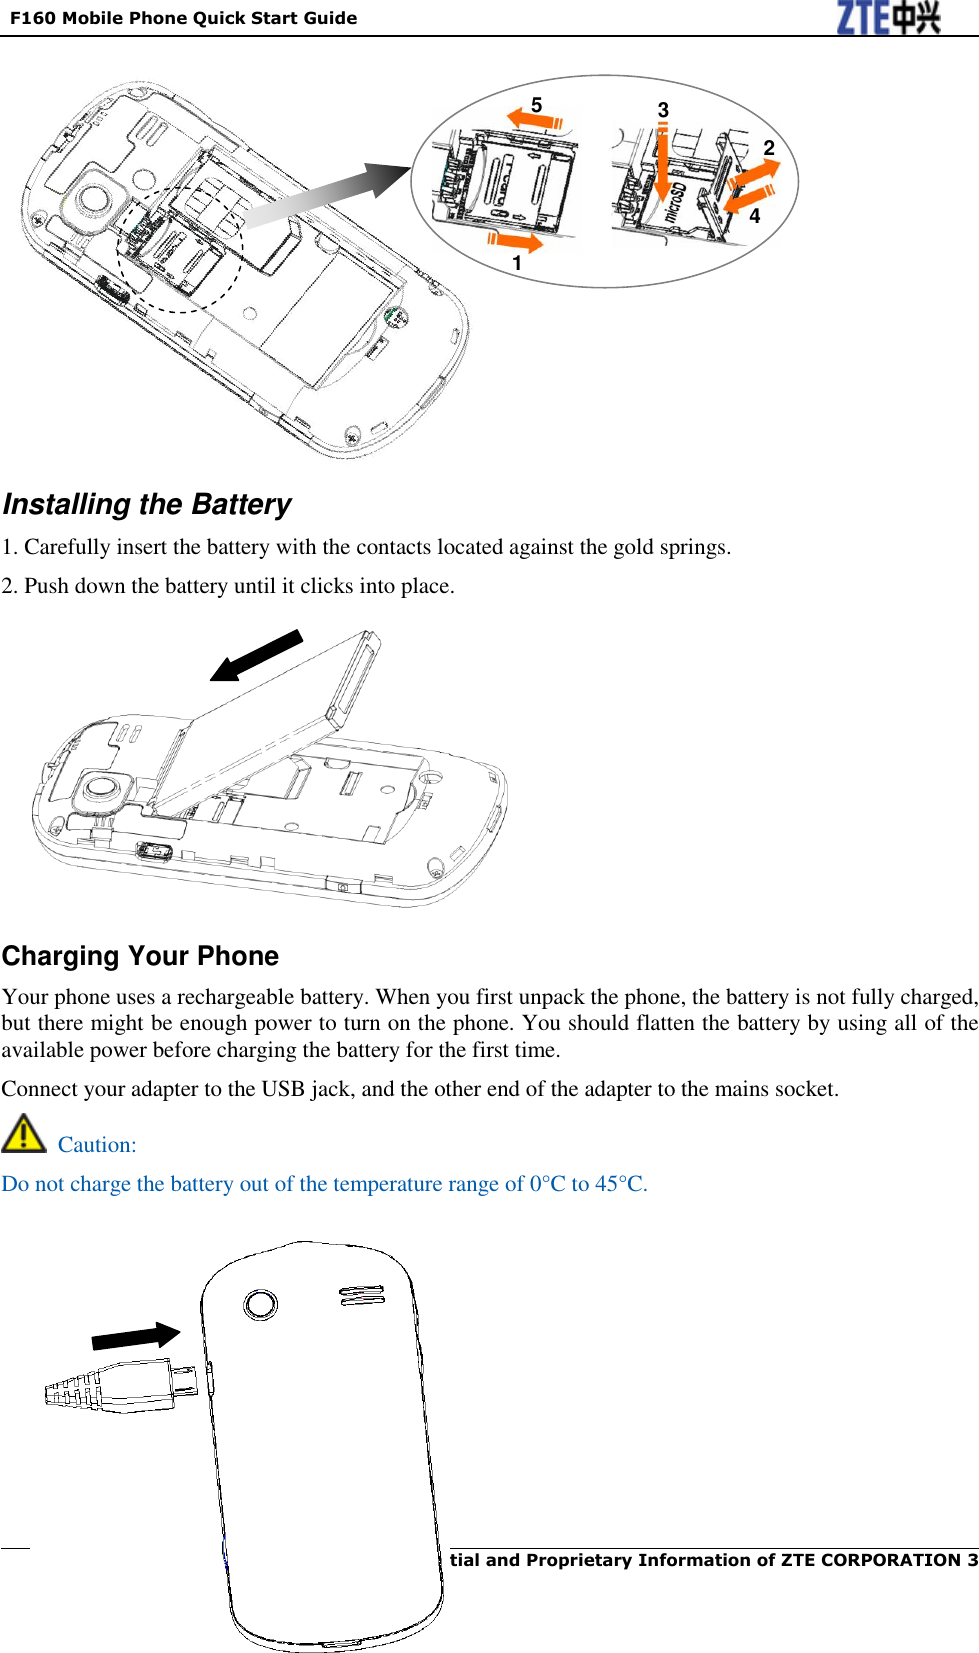   F160 Mobile Phone Quick Start Guide  Confidential and Proprietary Information of ZTE CORPORATION 3                  Installing the Battery 1. Carefully insert the battery with the contacts located against the gold springs. 2. Push down the battery until it clicks into place.            Charging Your Phone Your phone uses a rechargeable battery. When you first unpack the phone, the battery is not fully charged, but there might be enough power to turn on the phone. You should flatten the battery by using all of the available power before charging the battery for the first time. Connect your adapter to the USB jack, and the other end of the adapter to the mains socket.   Caution: Do not charge the battery out of the temperature range of 0°C to 45°C.          2 3 4 1 5 